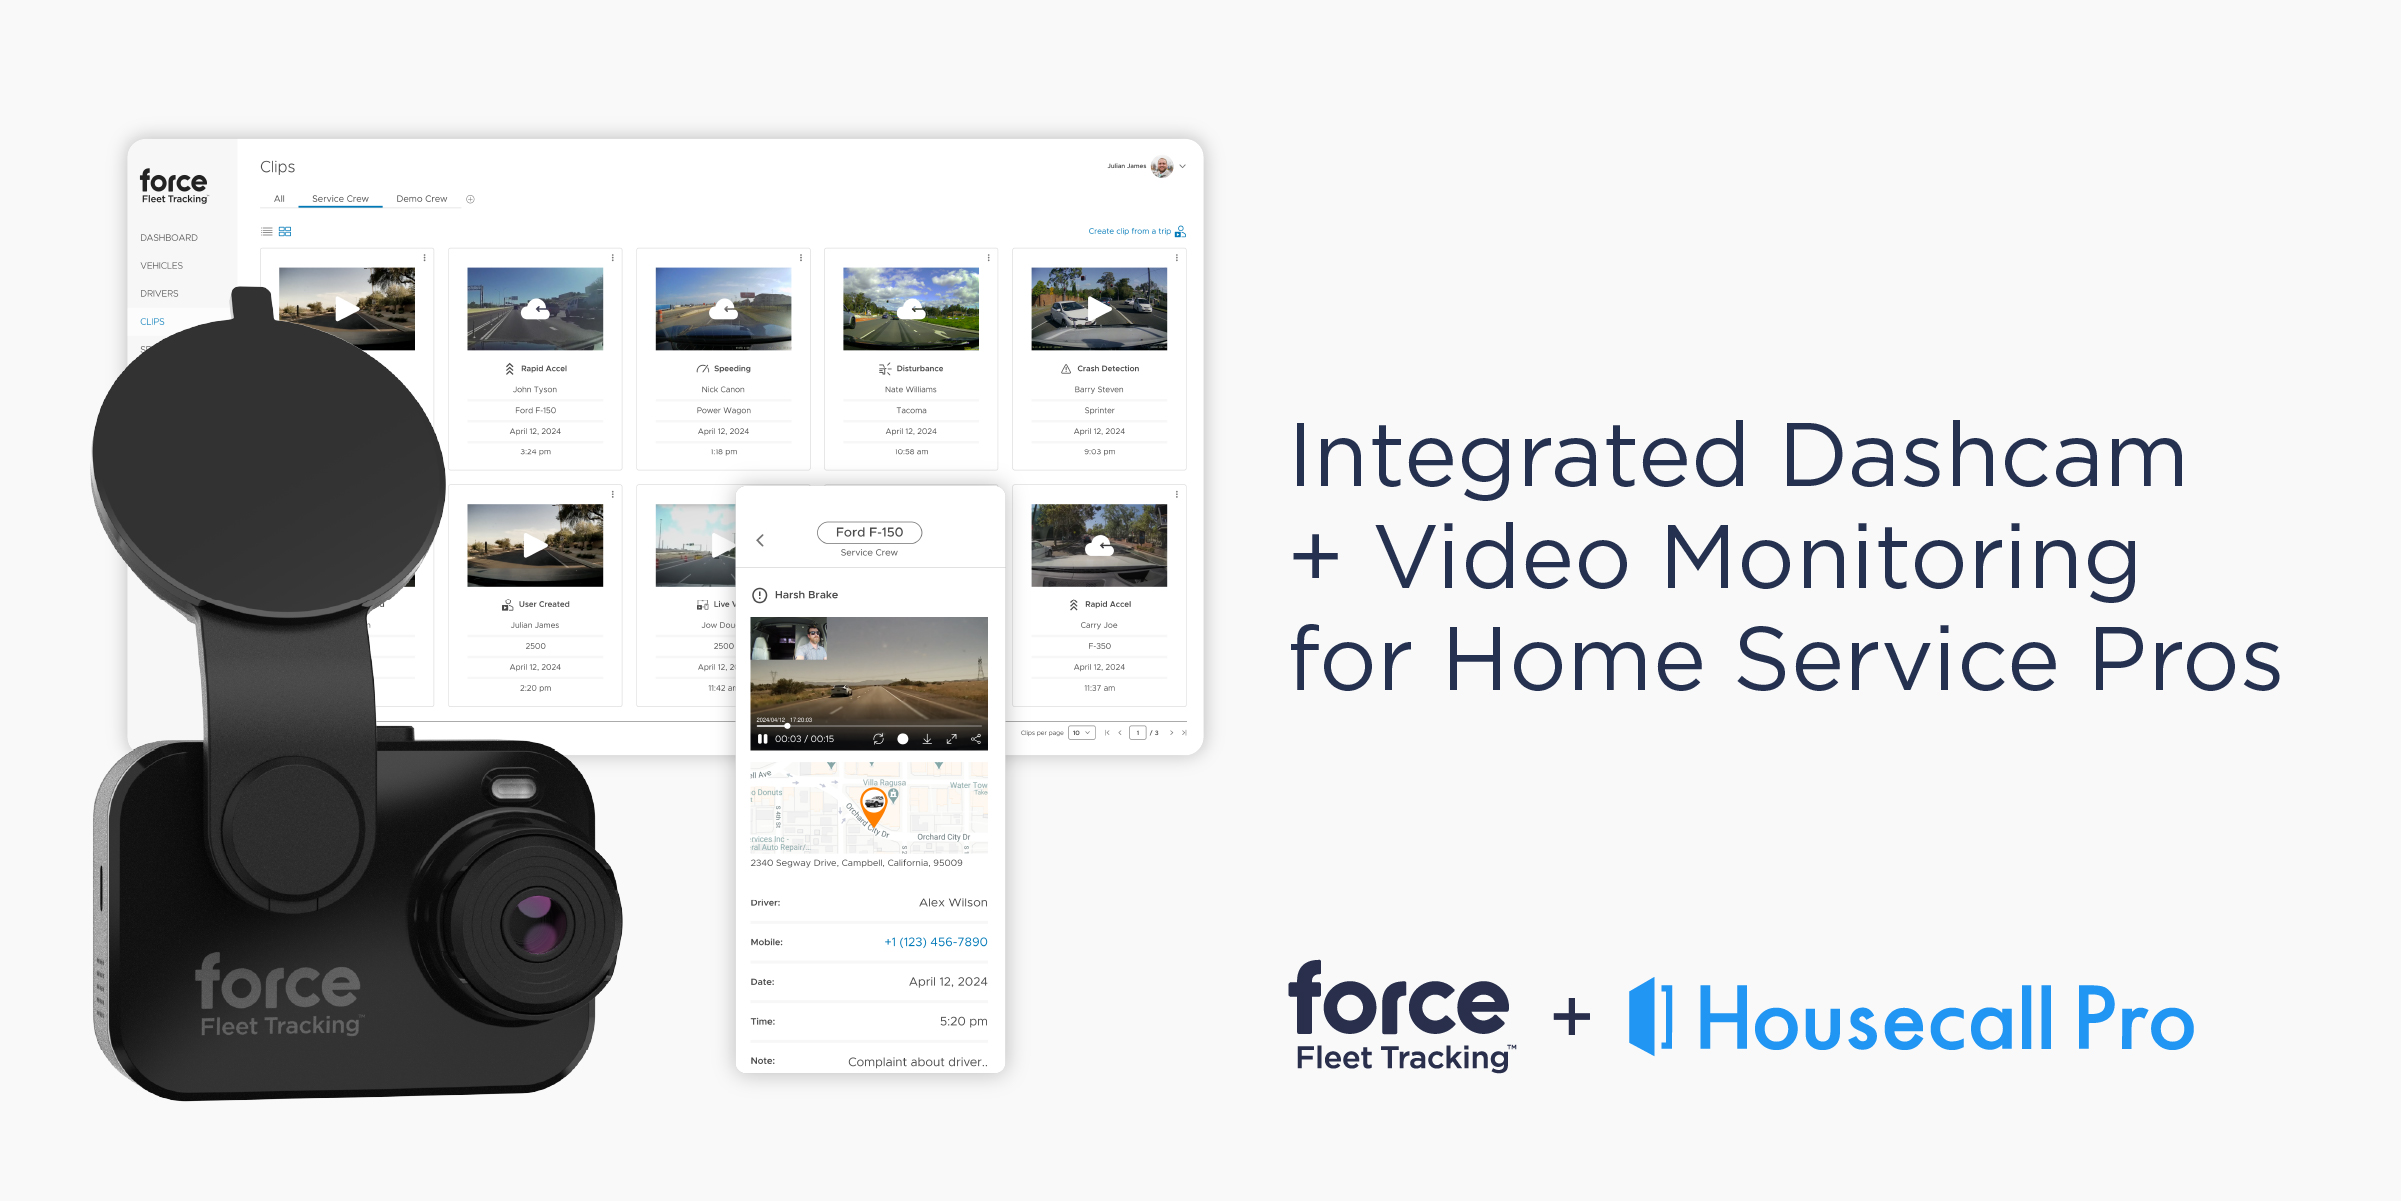 Housecall Pro & Force Fleet Tracking Team Up on Video Telematics for Home Service Pros